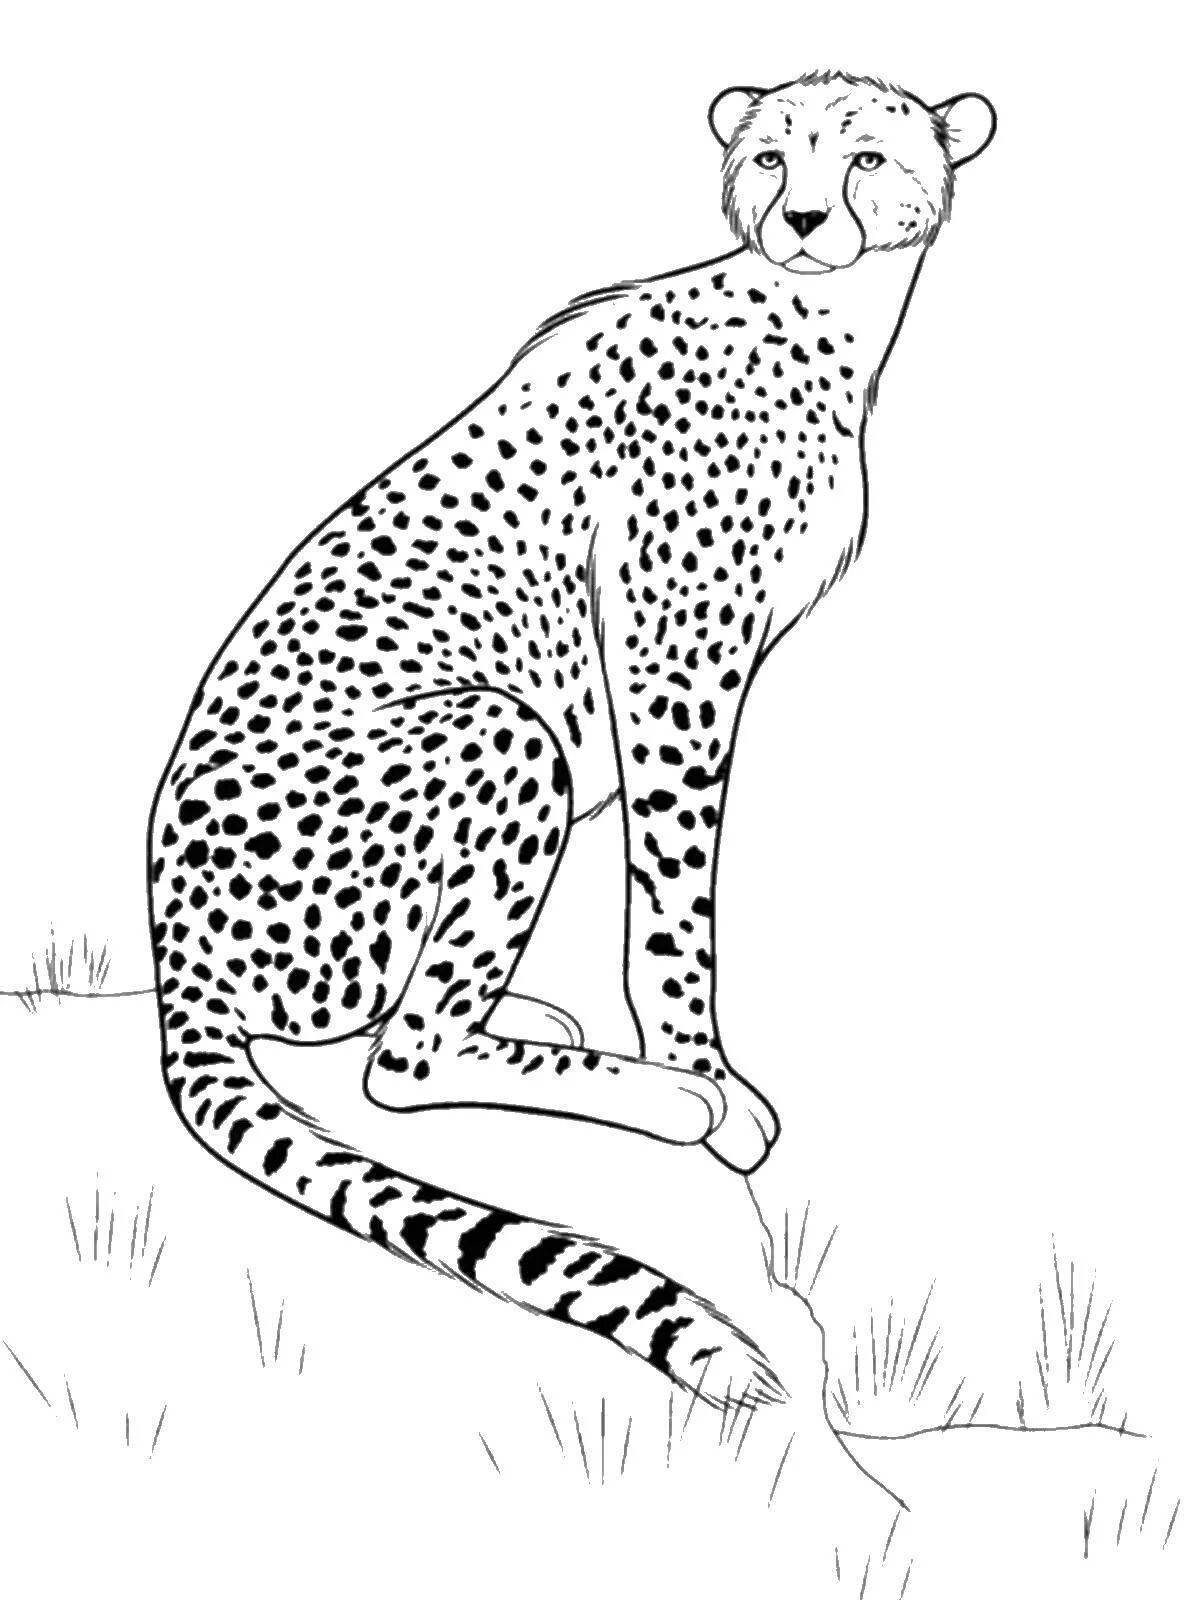 Coloring page happy cheetah for kids